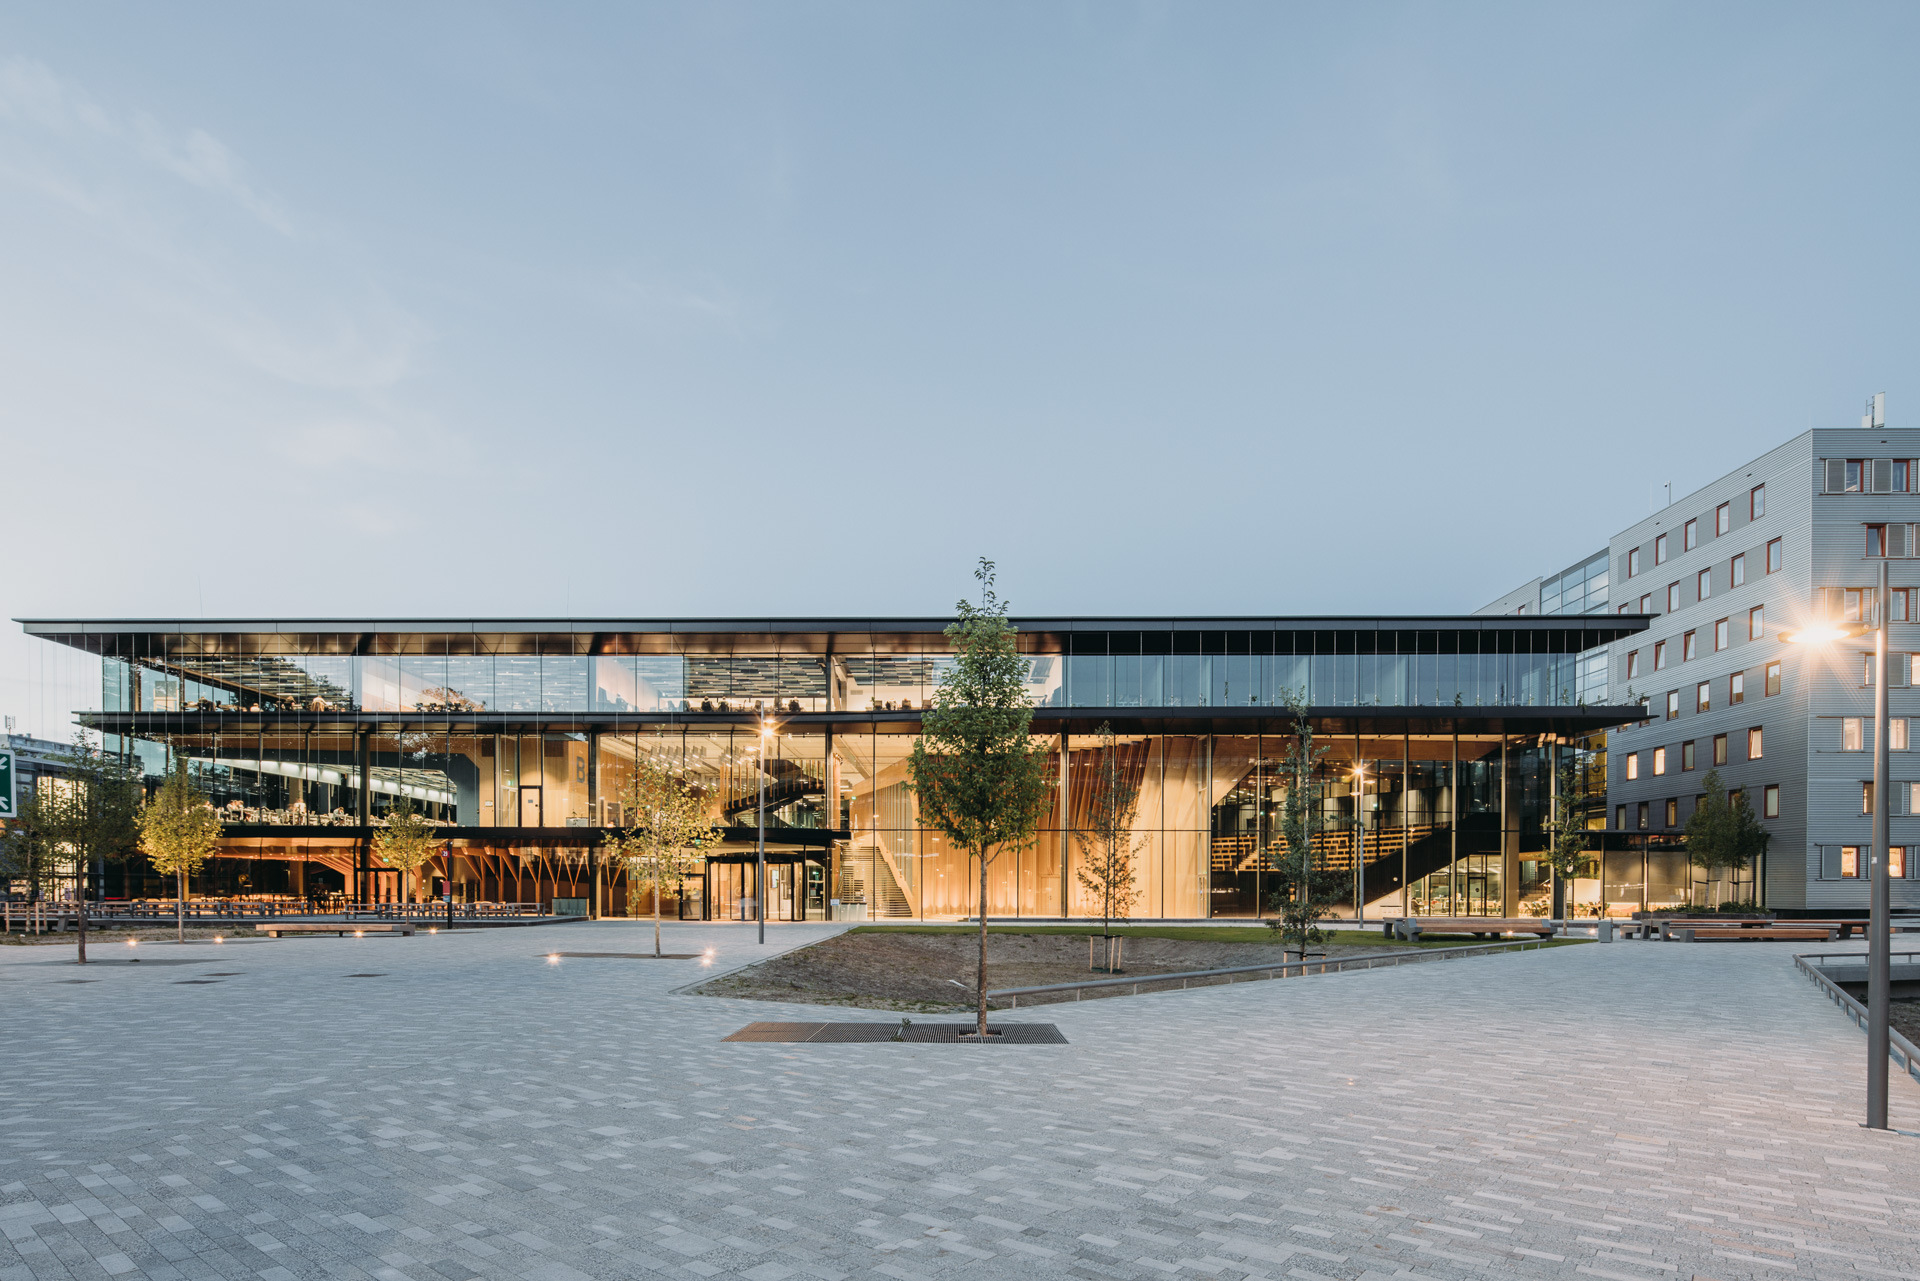 PRESS RELEASE | Teaching by example: UNStudio completes Echo, the new energy-generating interfaculty teaching building at TU Delft